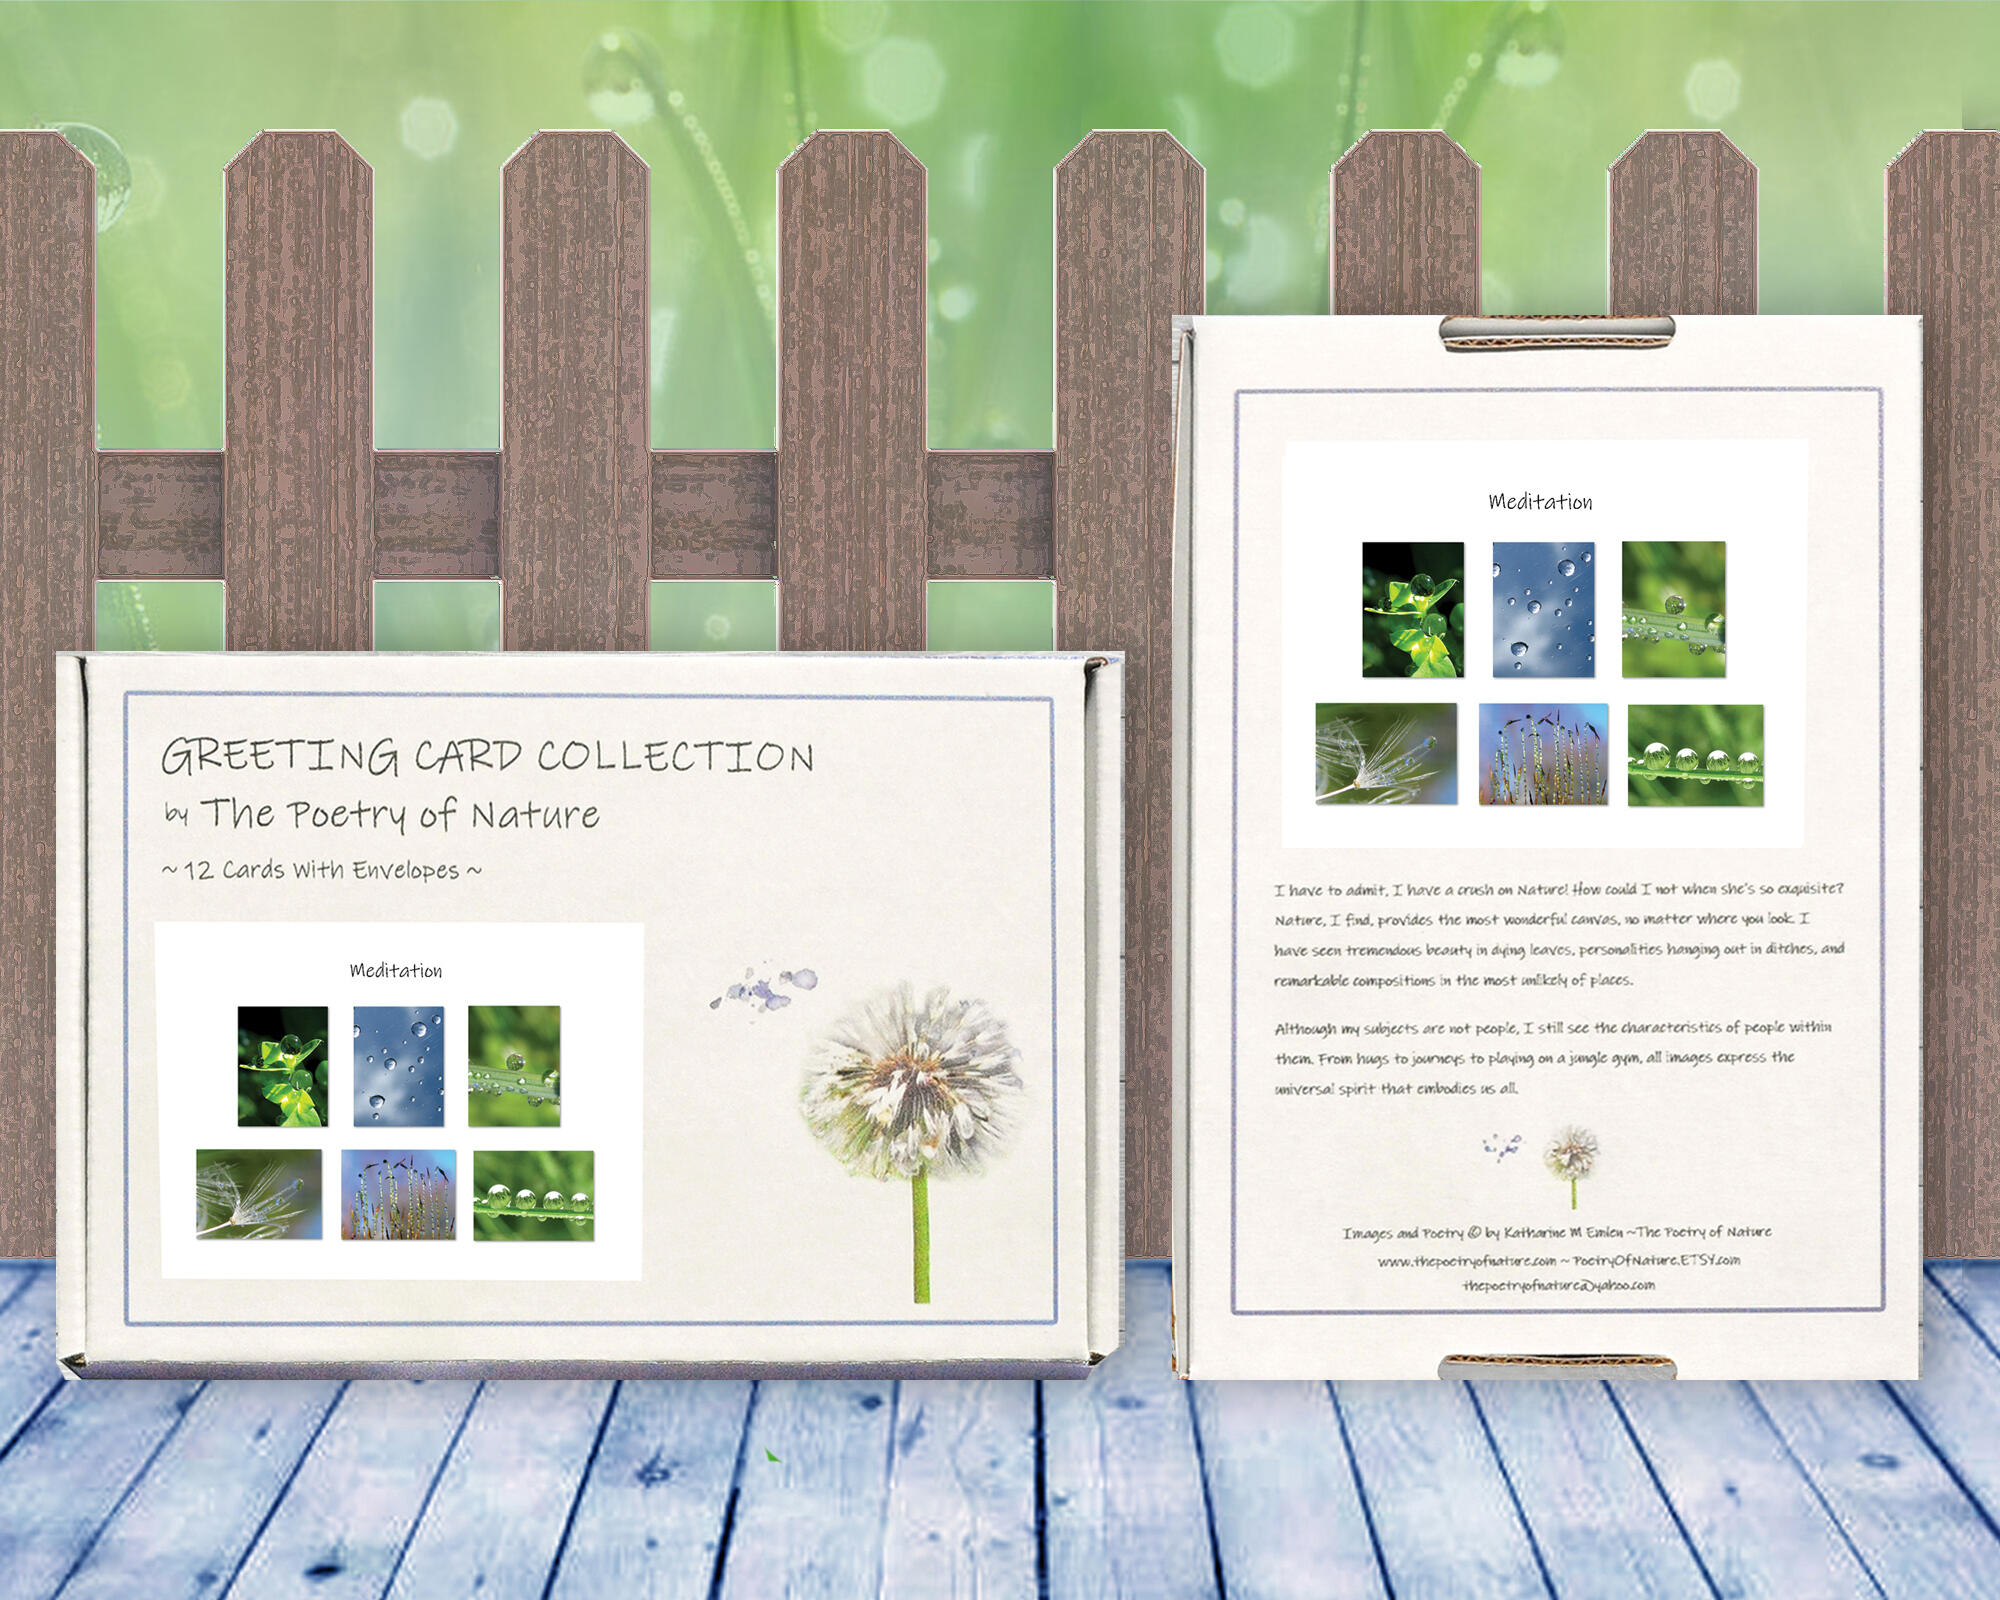 Meditation – Peaceful soothing, greeting card collection by The Poetry of Nature, Stories in nature photo cards with poems. Boxed Set Baker's Dozen